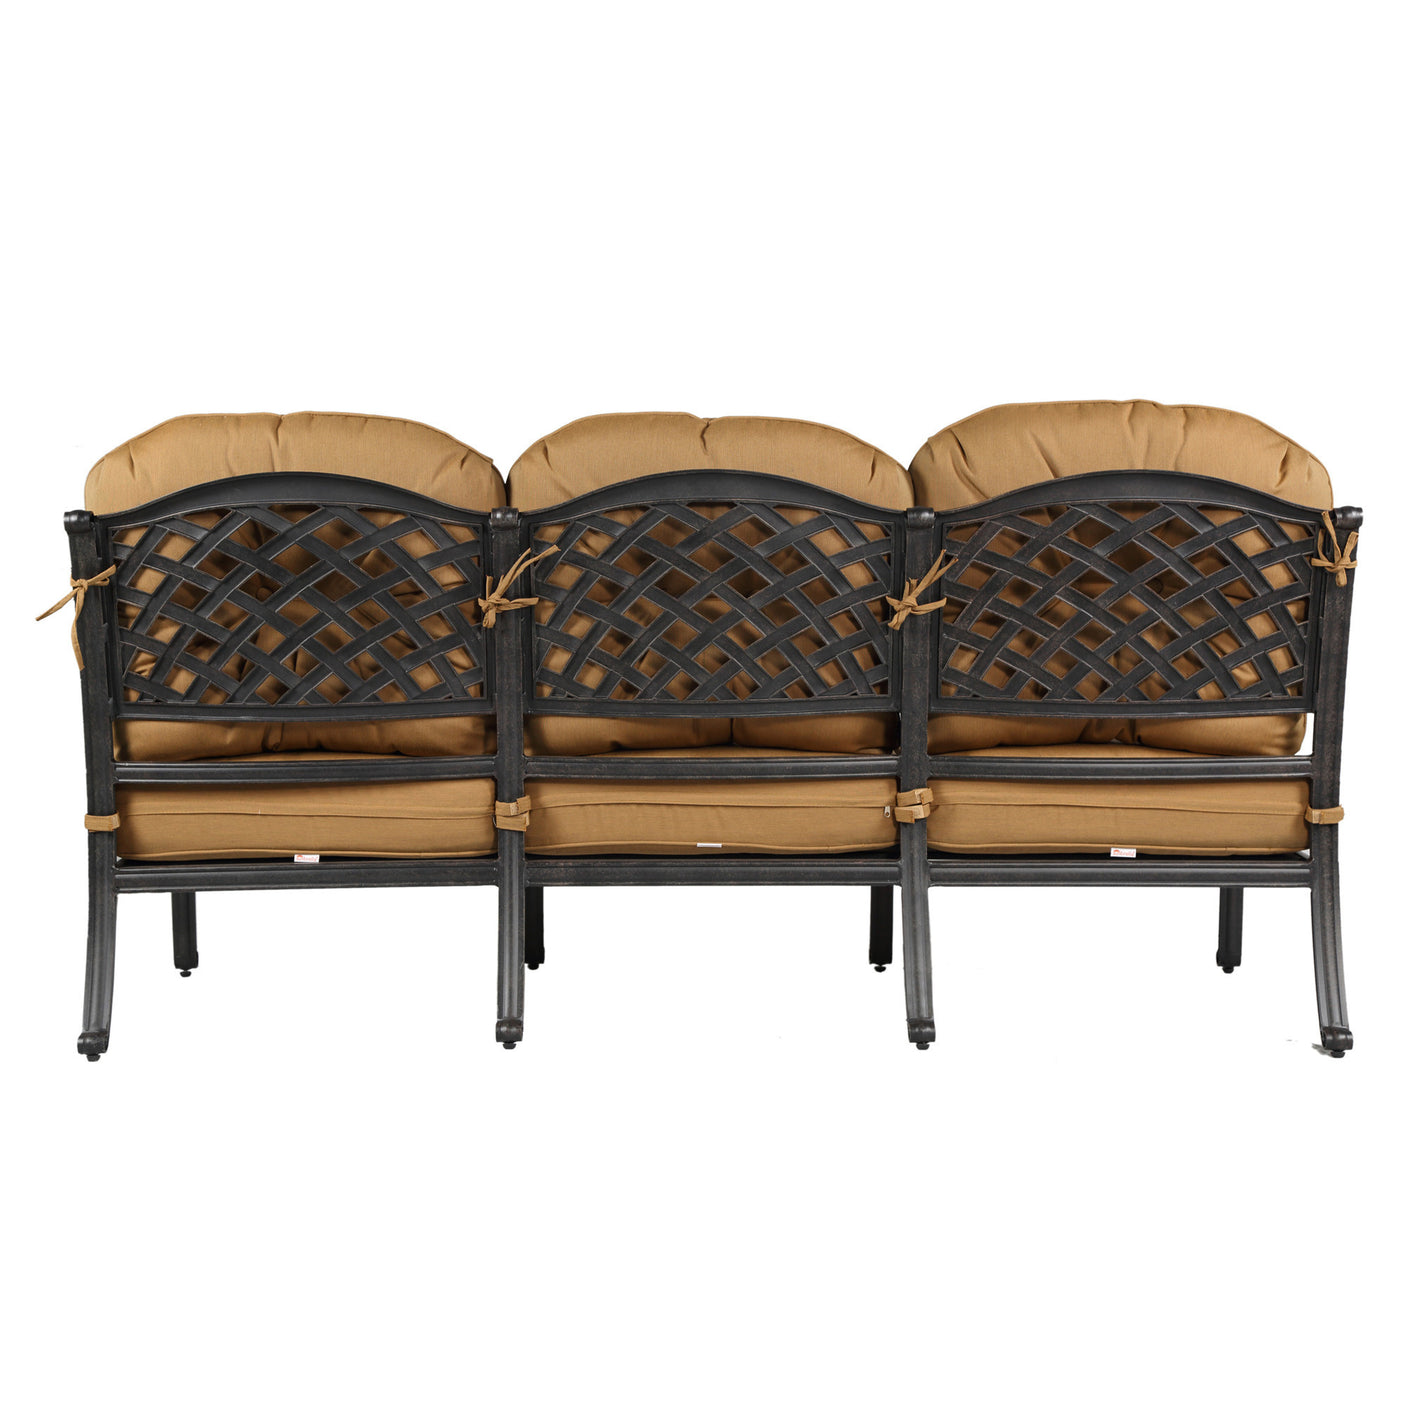 Cast Aluminum 5-Piece High Back Deep Seating Set with Cushions, Brown